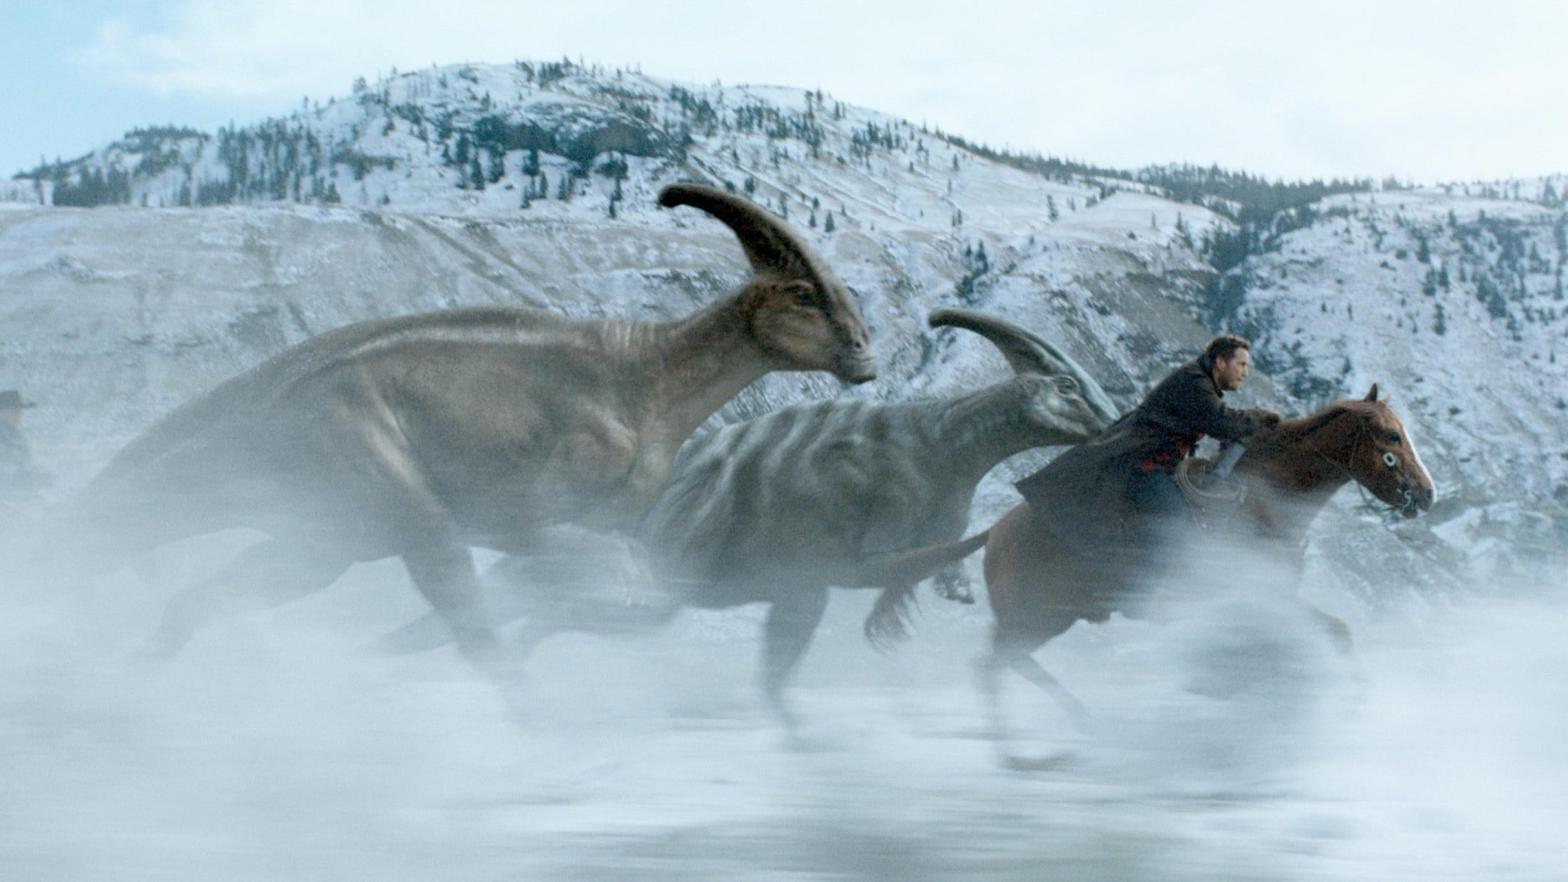 Chris Pratt making like Ginuwine and riding that pony. Only it's a horse. With dinosaurs.  (Image: Universal)